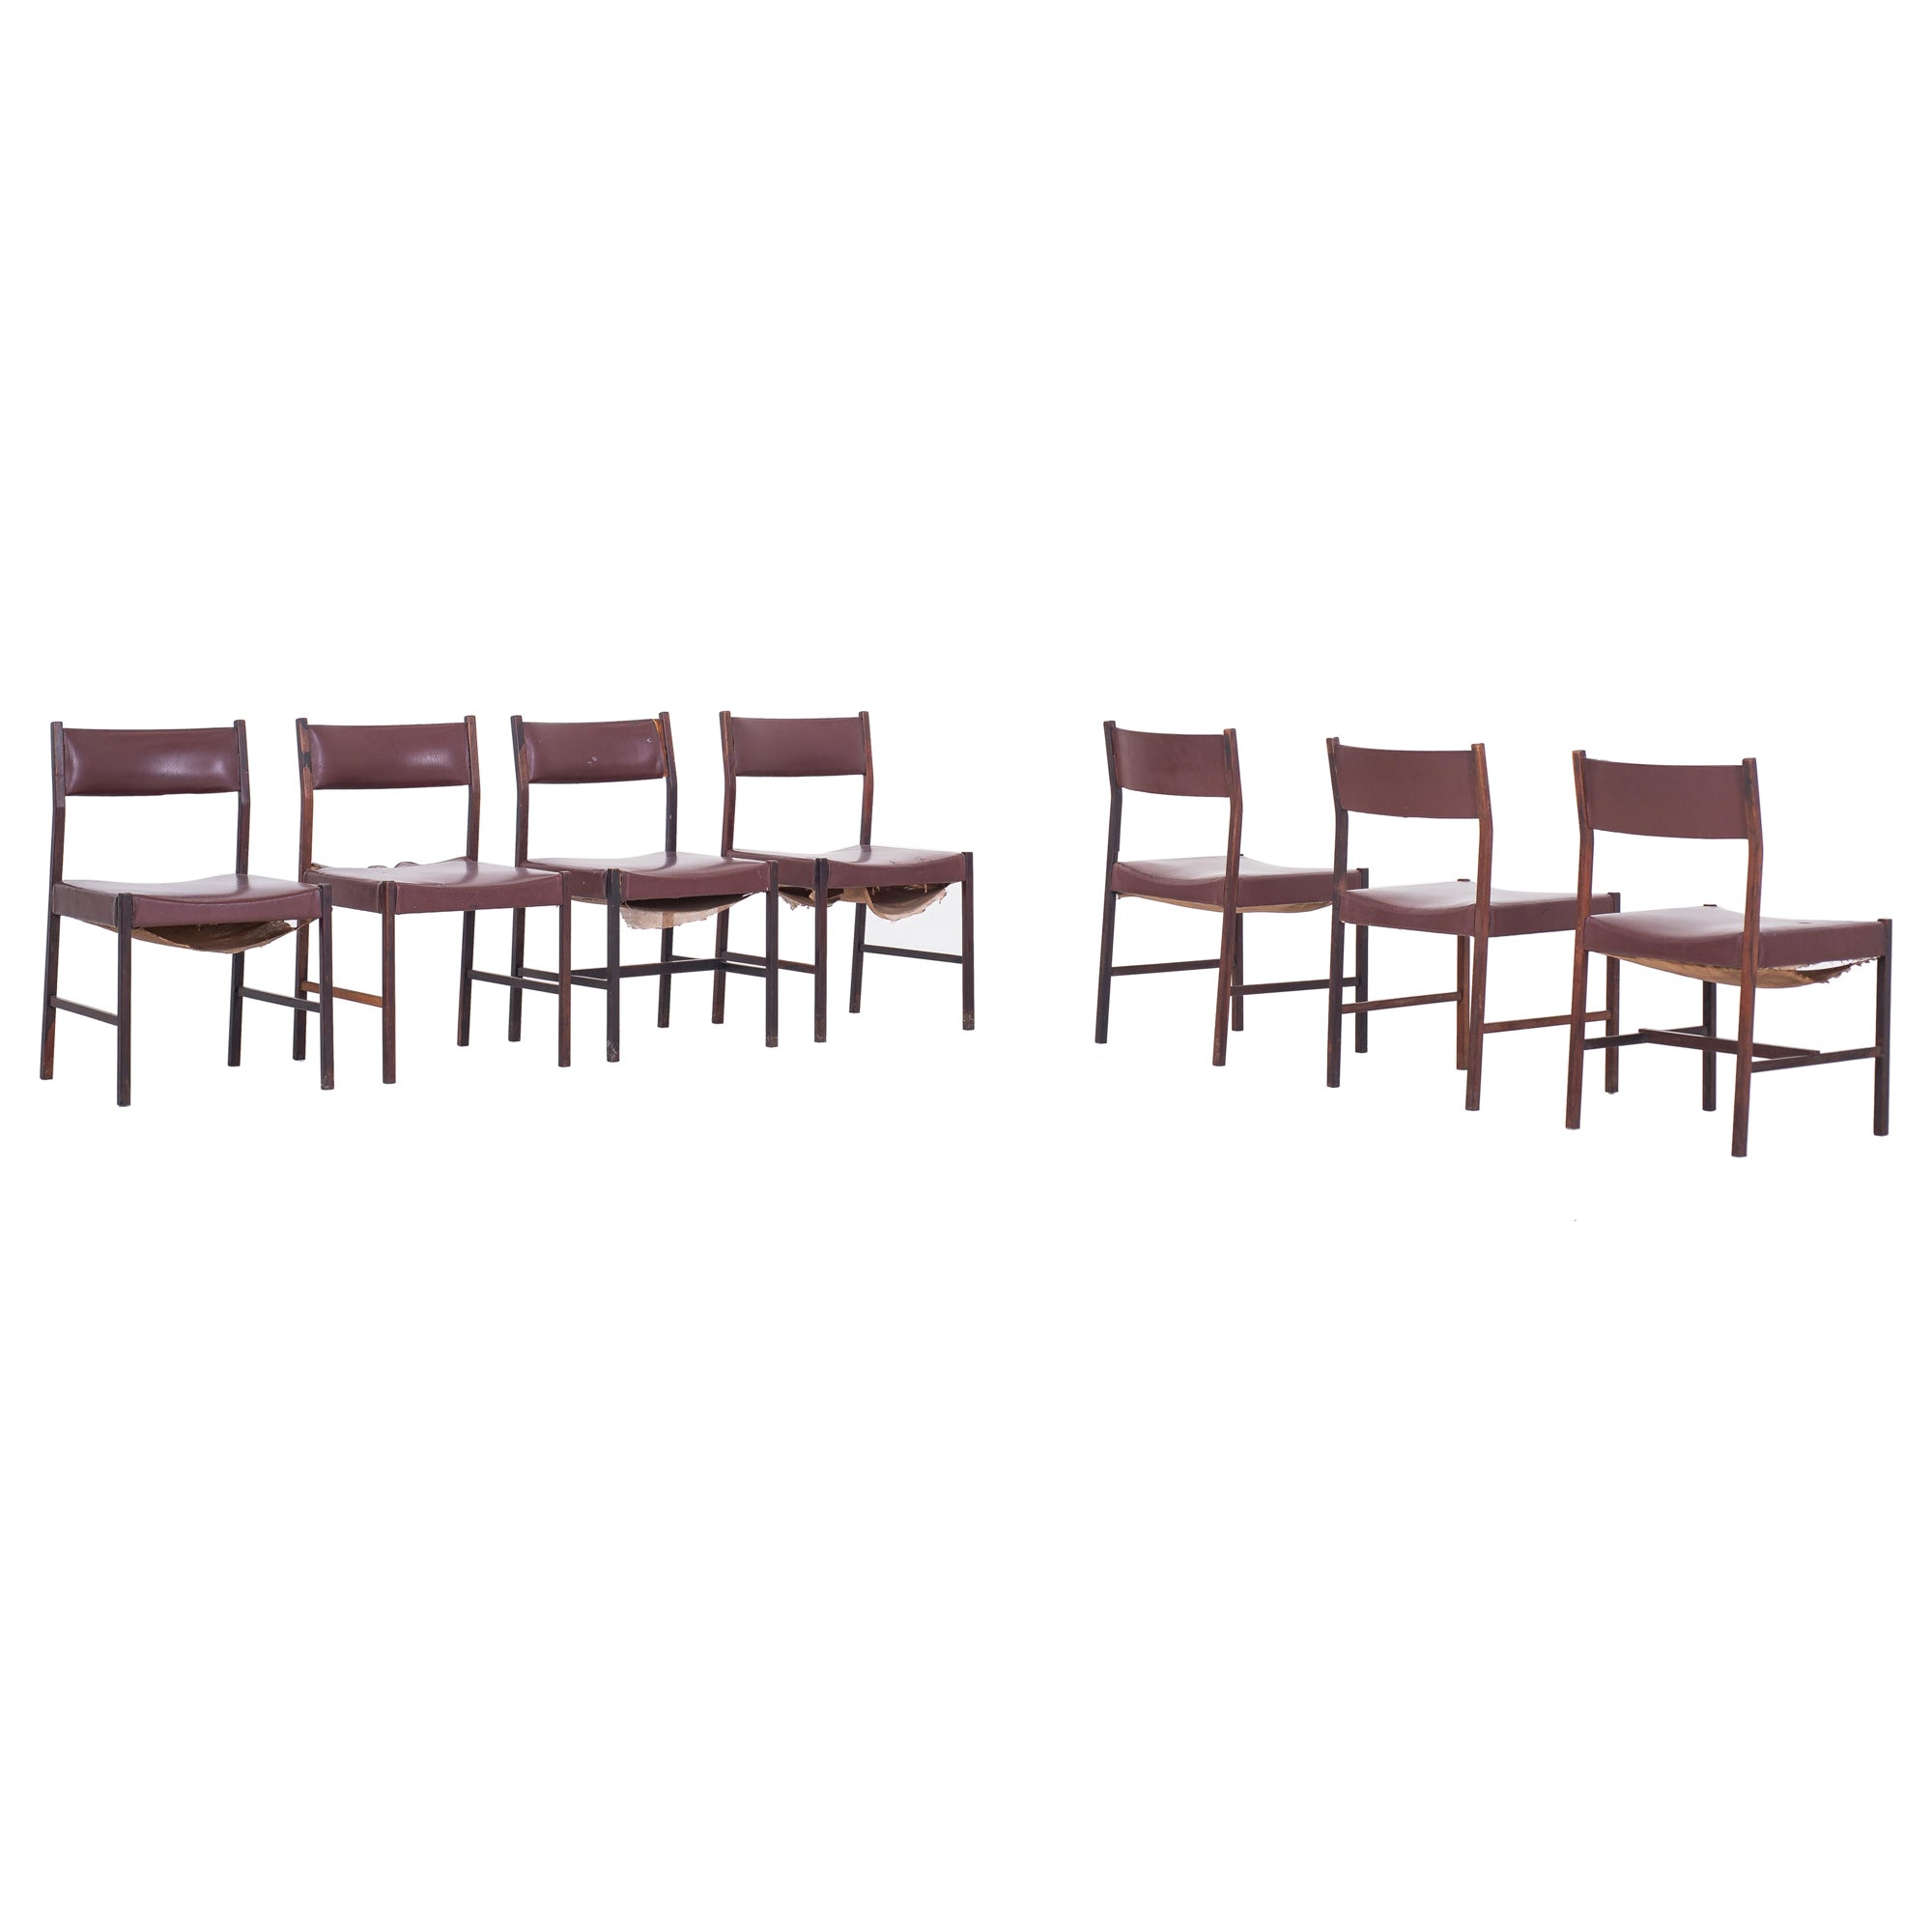 Set of 7 Itamaraty Dining Chairs in Original Condition By Jorge Zalszupin, 1959 For Sale